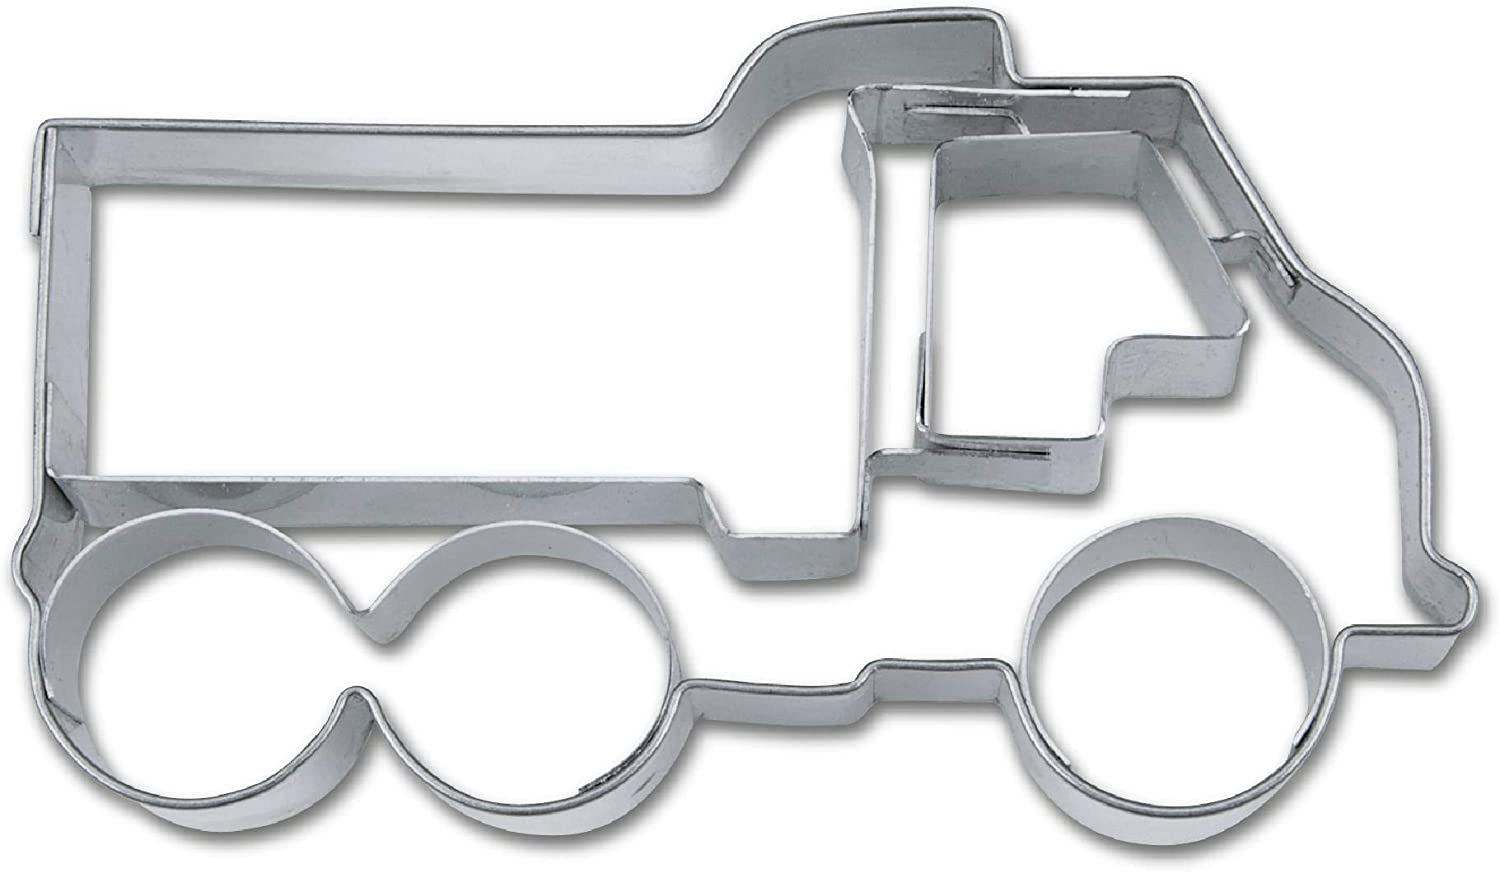 Staedter NEW Vice cookie cutter stainless steel, 8 cm